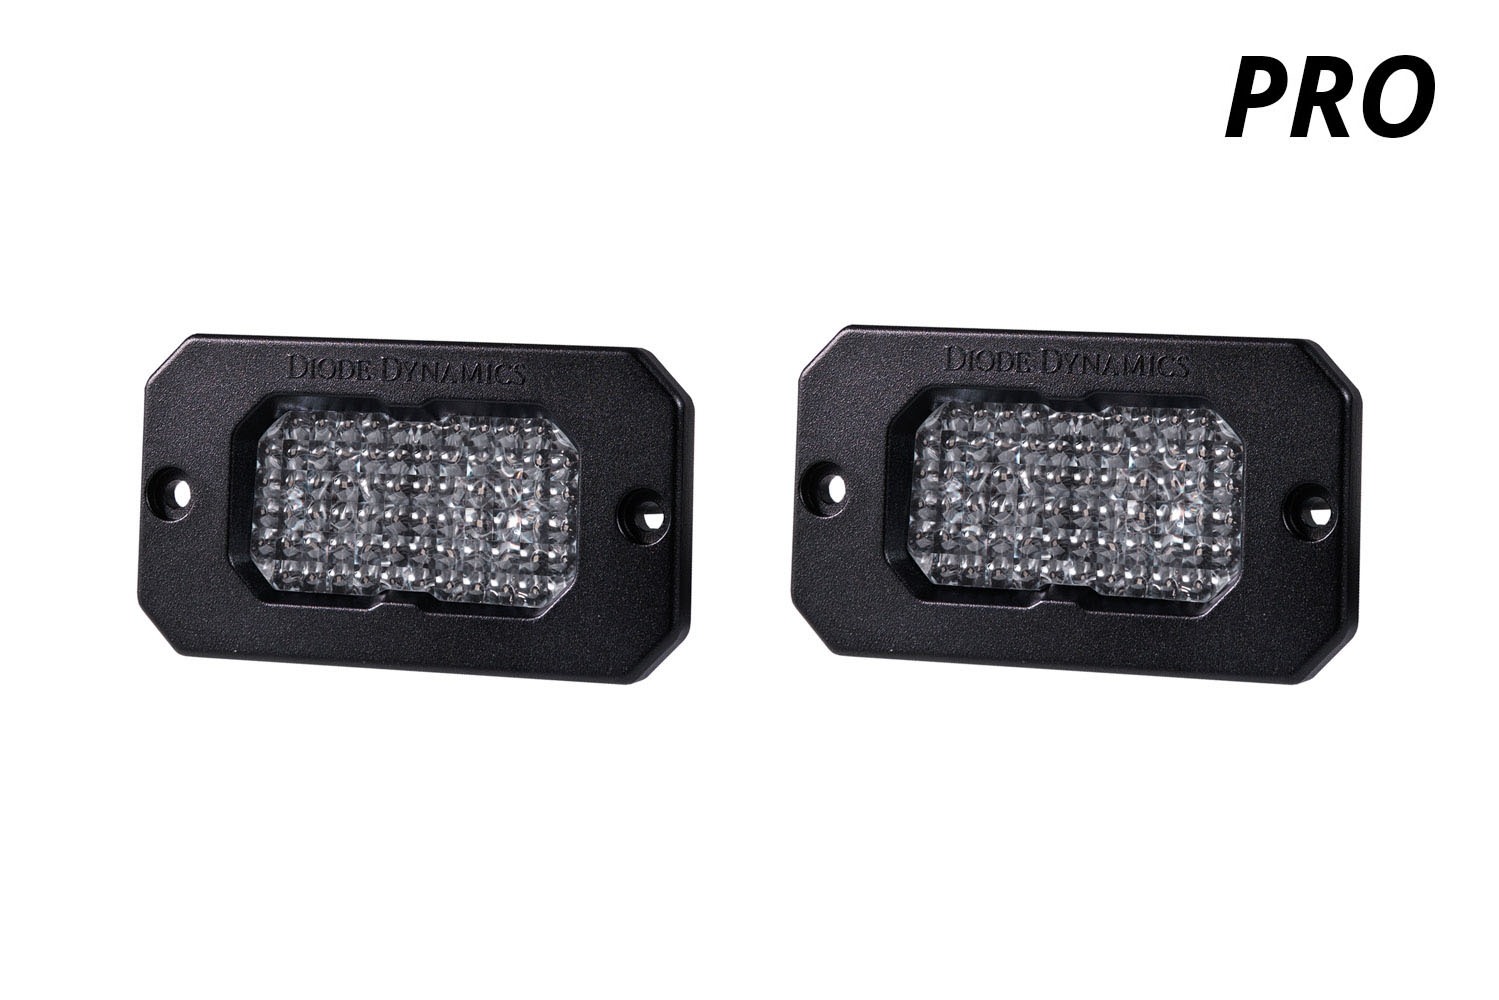 Diode Dynamics Stage Series 2 Inch LED Pod, Pro White Flood Flush BBL Pair - Click Image to Close